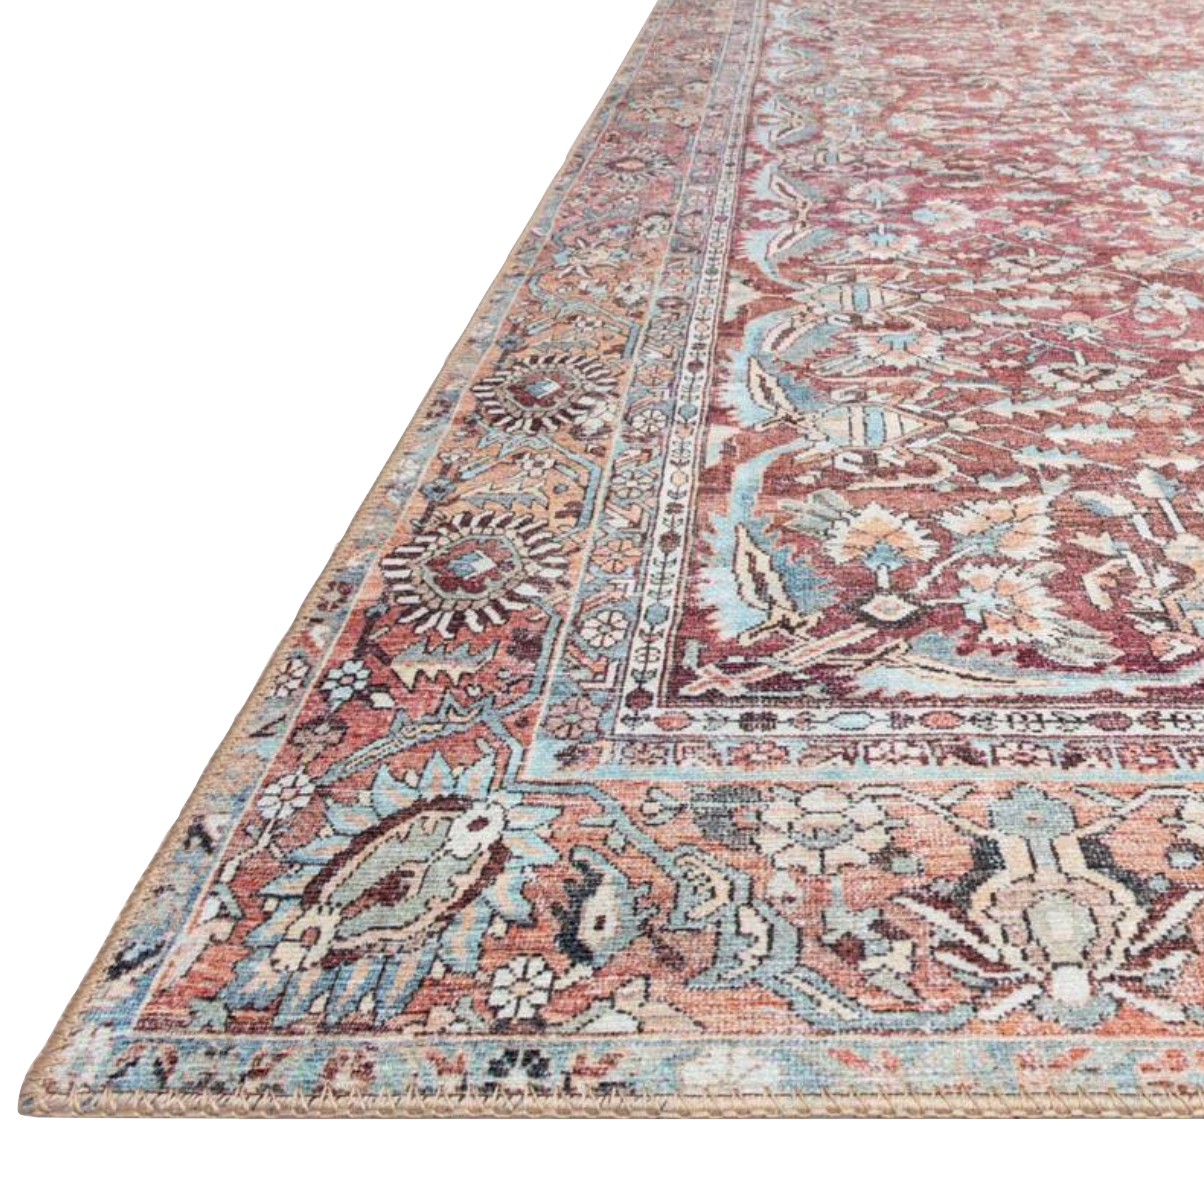 Old soul, new spirit. Power-loomed of 100% polyester, the Wynter Tomato / Teal area rug showcases a one-of-a-kind vintage or antique area rug look at an affordable price. This rug brings in tones of red, blue, orange, and hints of ivory, and ideal for high traffic areas due to the rug's durability. The rug is perfect for living rooms, dining rooms, kitchens, hallways, and entryways.  Power Loomed 100% Polyester WYN-05 Tomato/Teal Colors: Red, Orange, Blue, Ivory